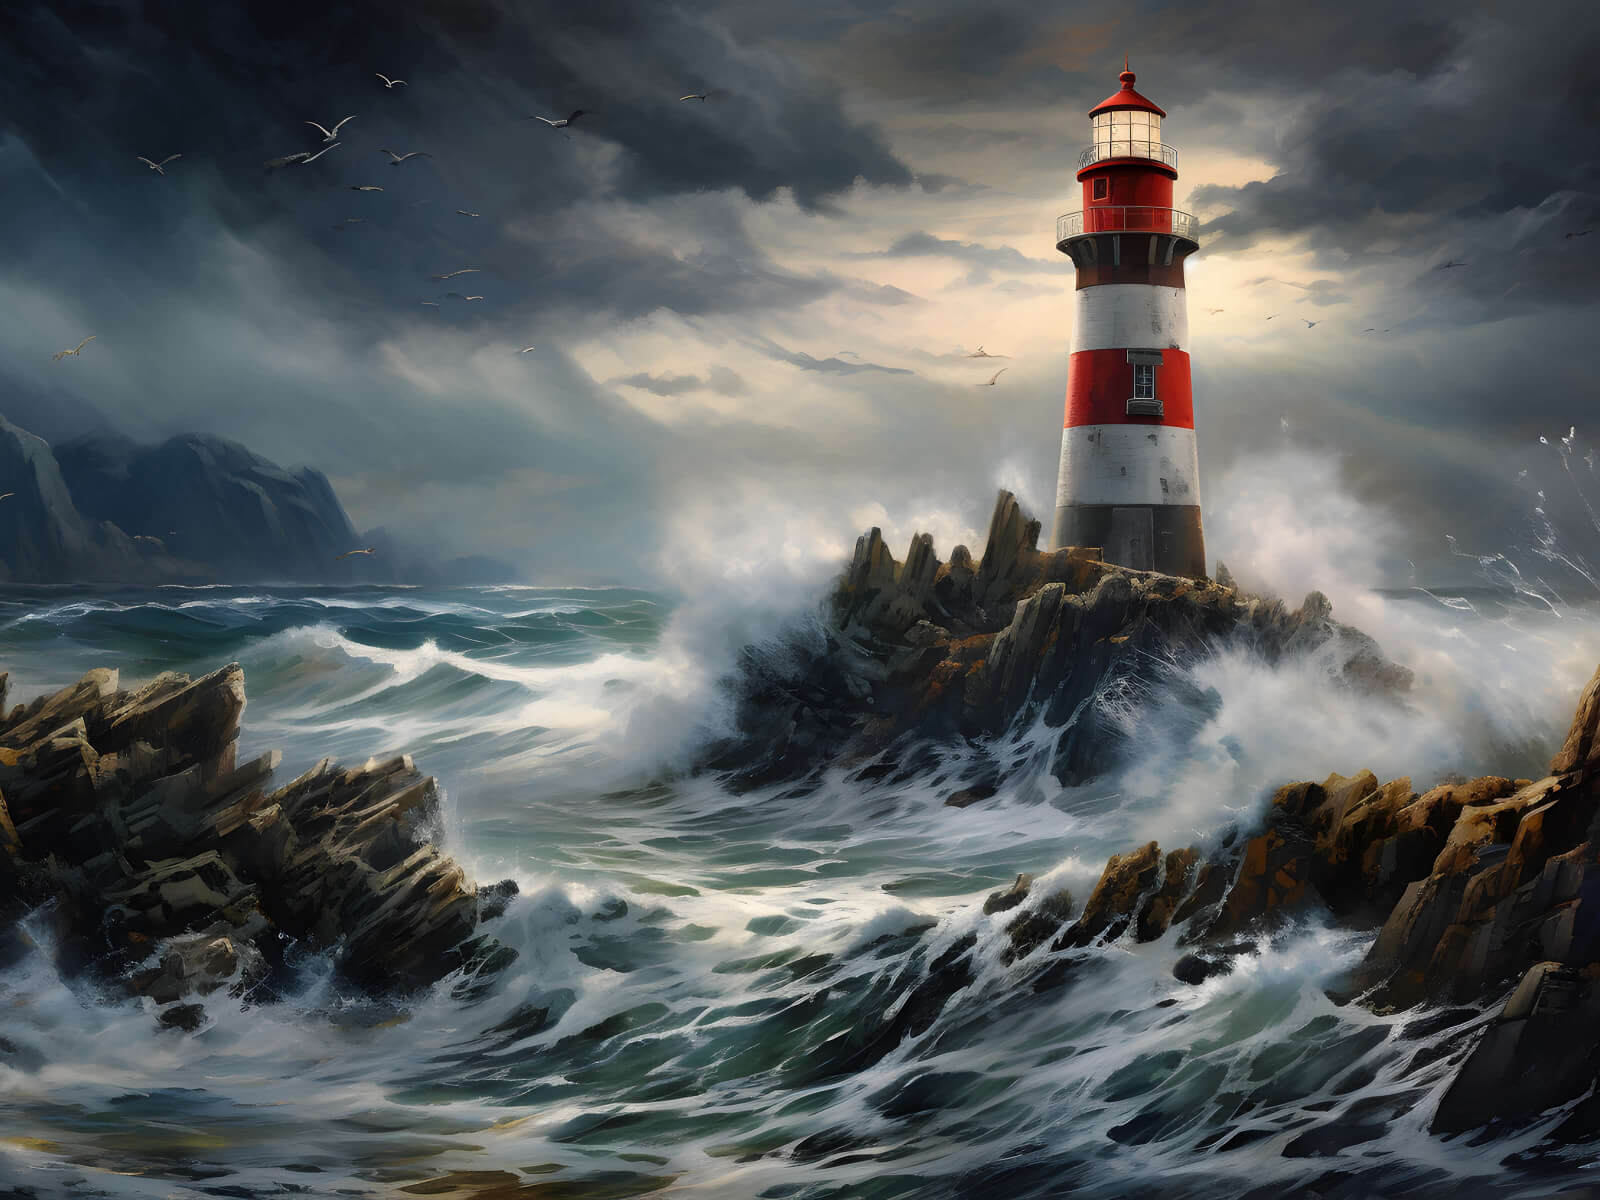 Lighthouse in the ocean waves wallpaper 1600x1200